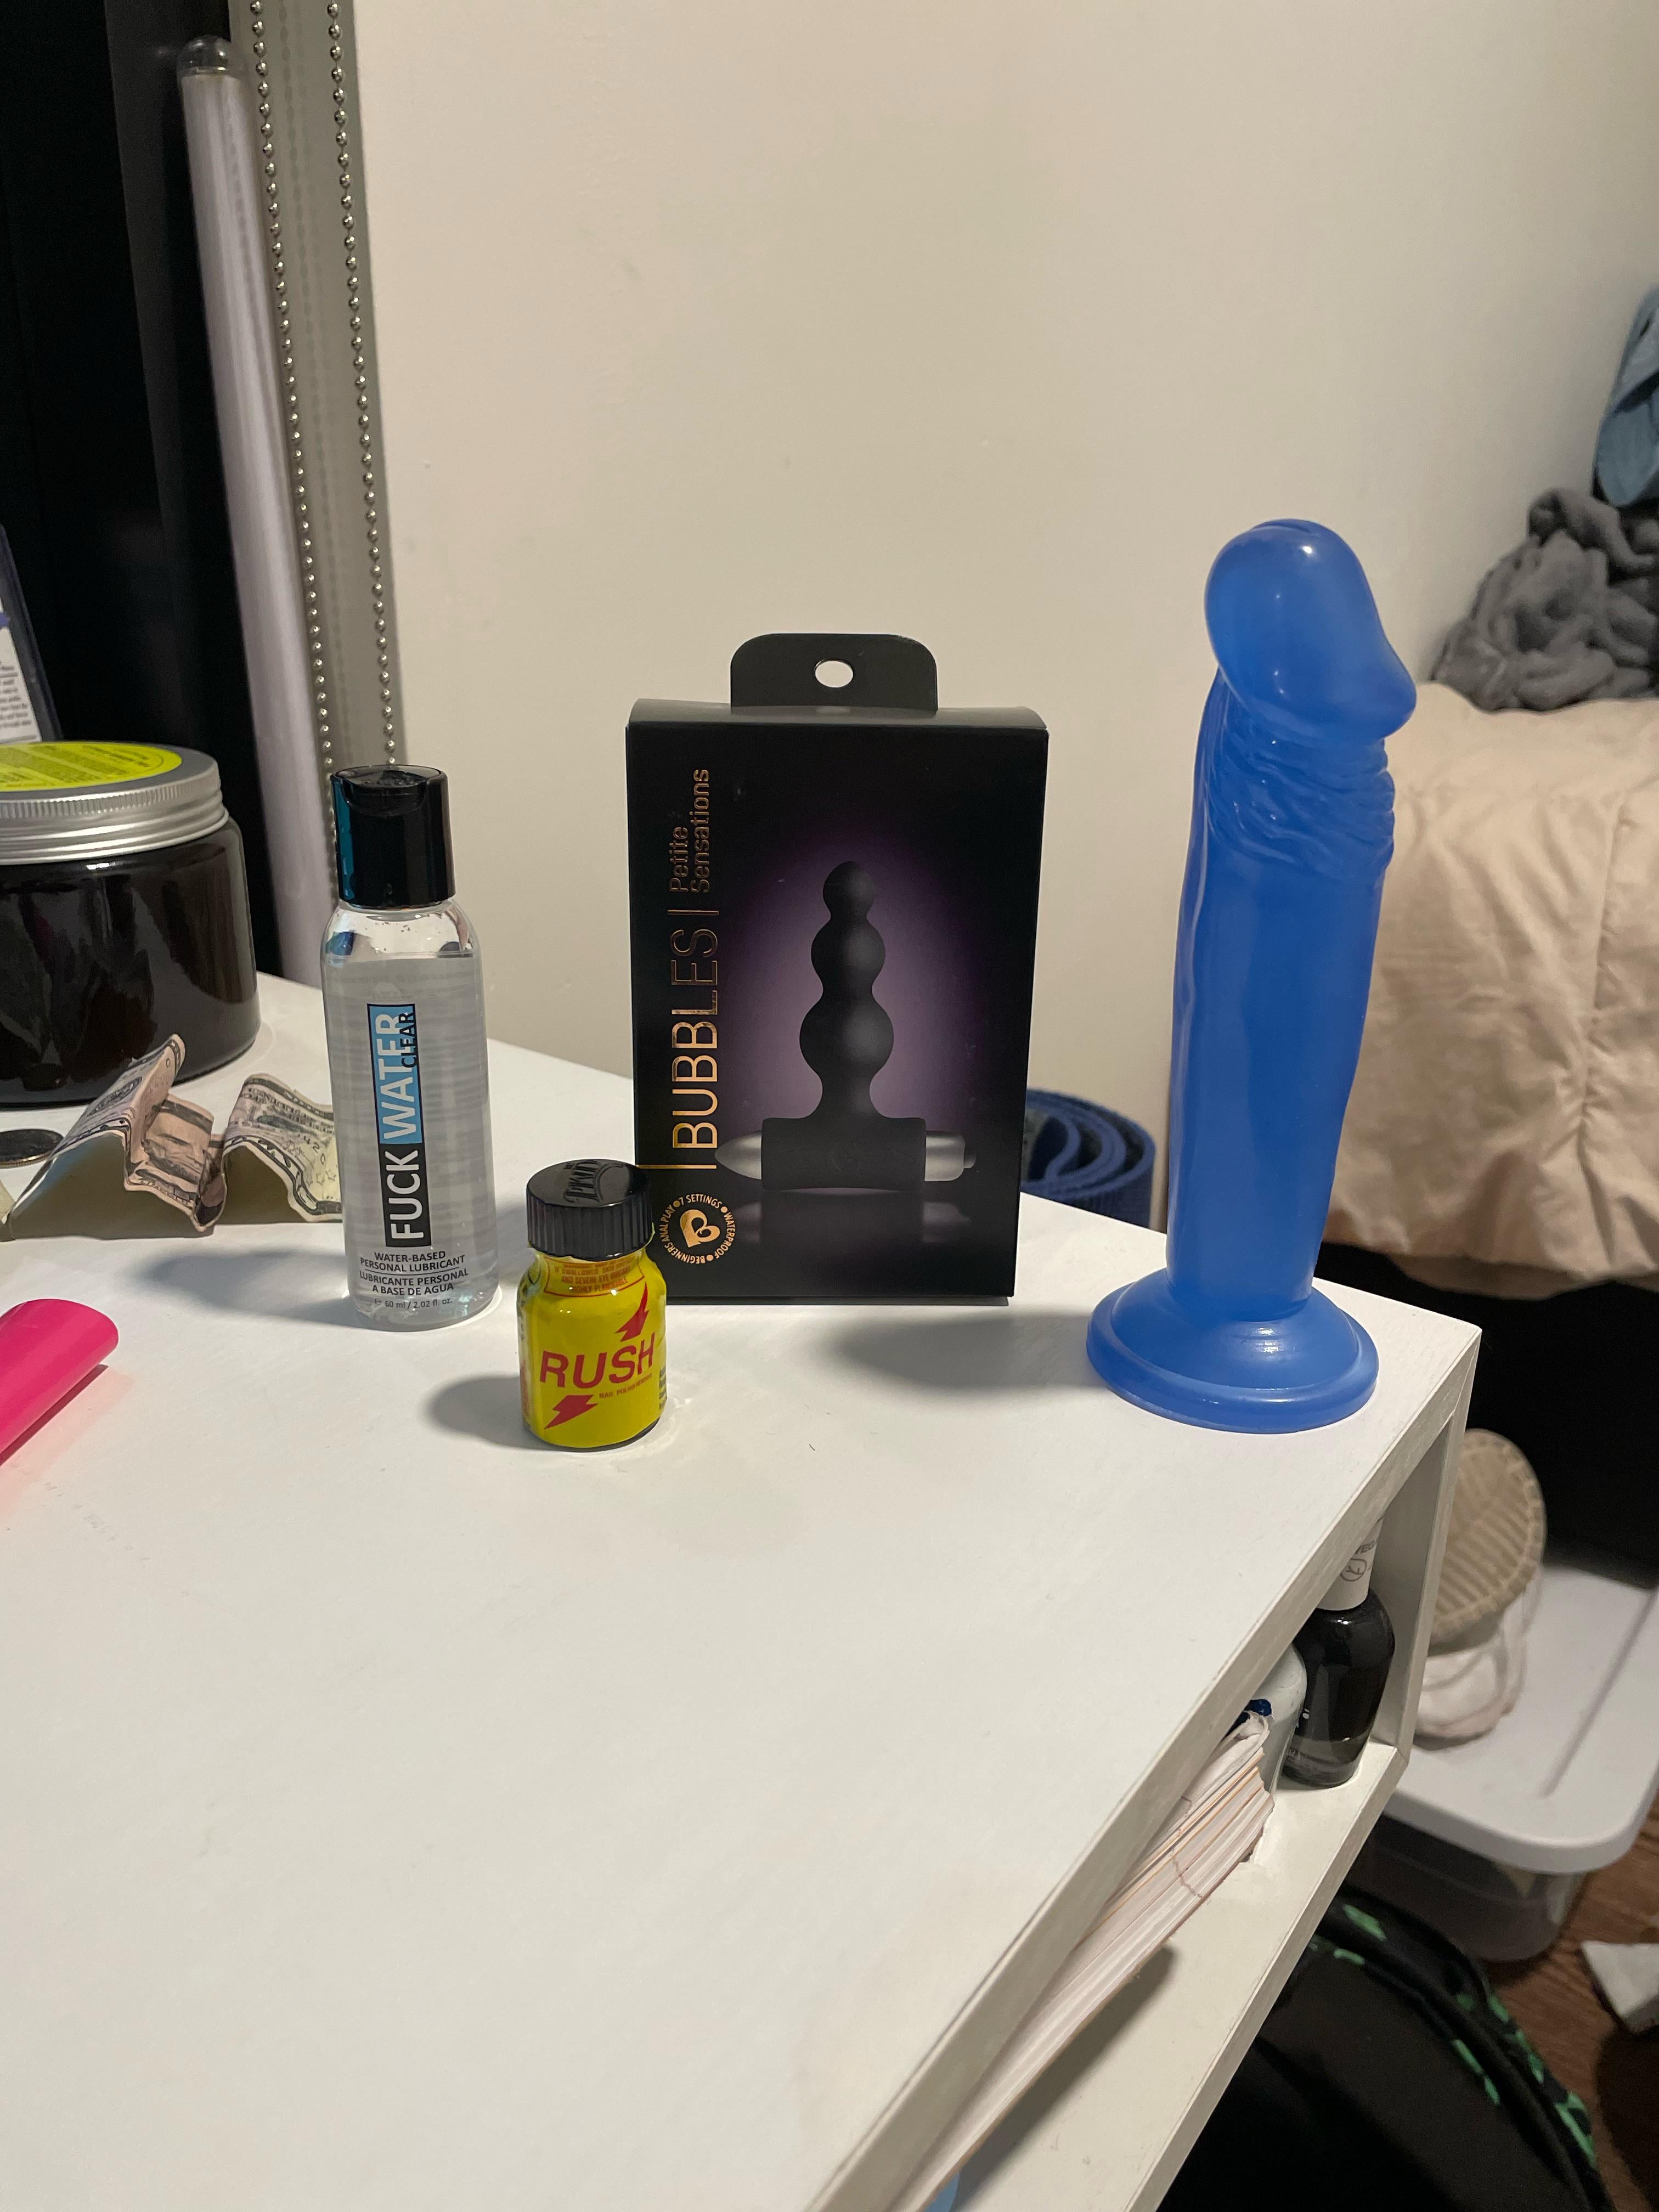 Just went to a sex store for the first time